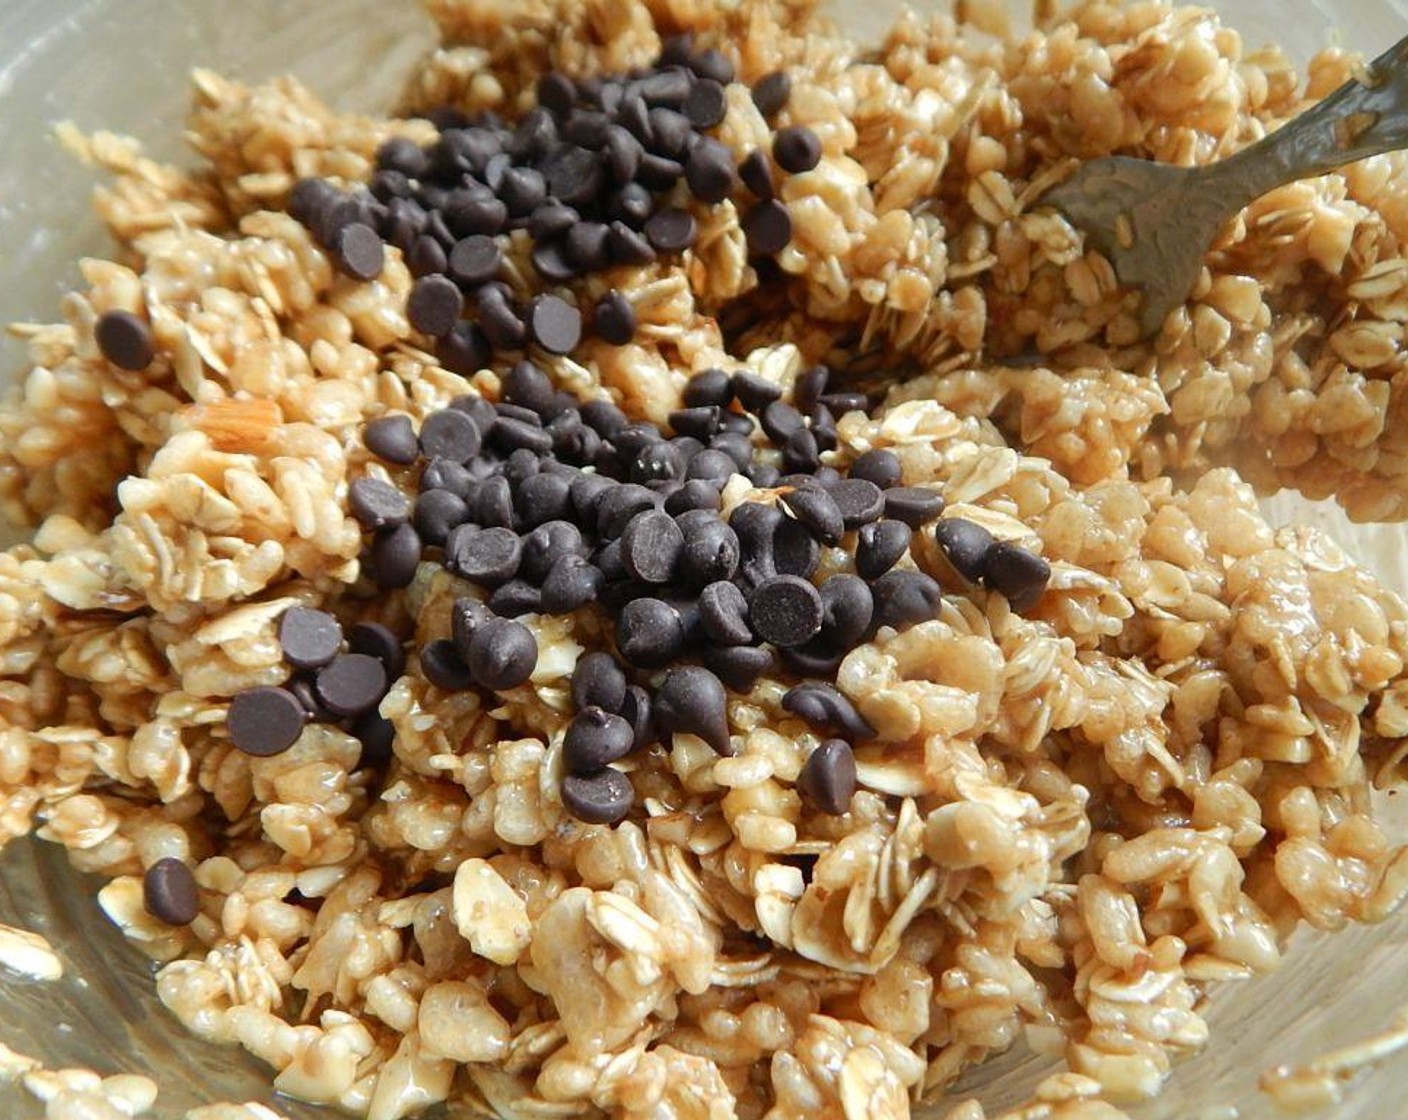 step 1 Spray a 9 inch pan and set aside. In a large bowl, mix your Rice Krispies® Cereal (1 3/4 cups), Oats (1 1/4 cups), and Almonds (1/4 cup). Save the Mini Chocolate Chips (2 Tbsp) for later.